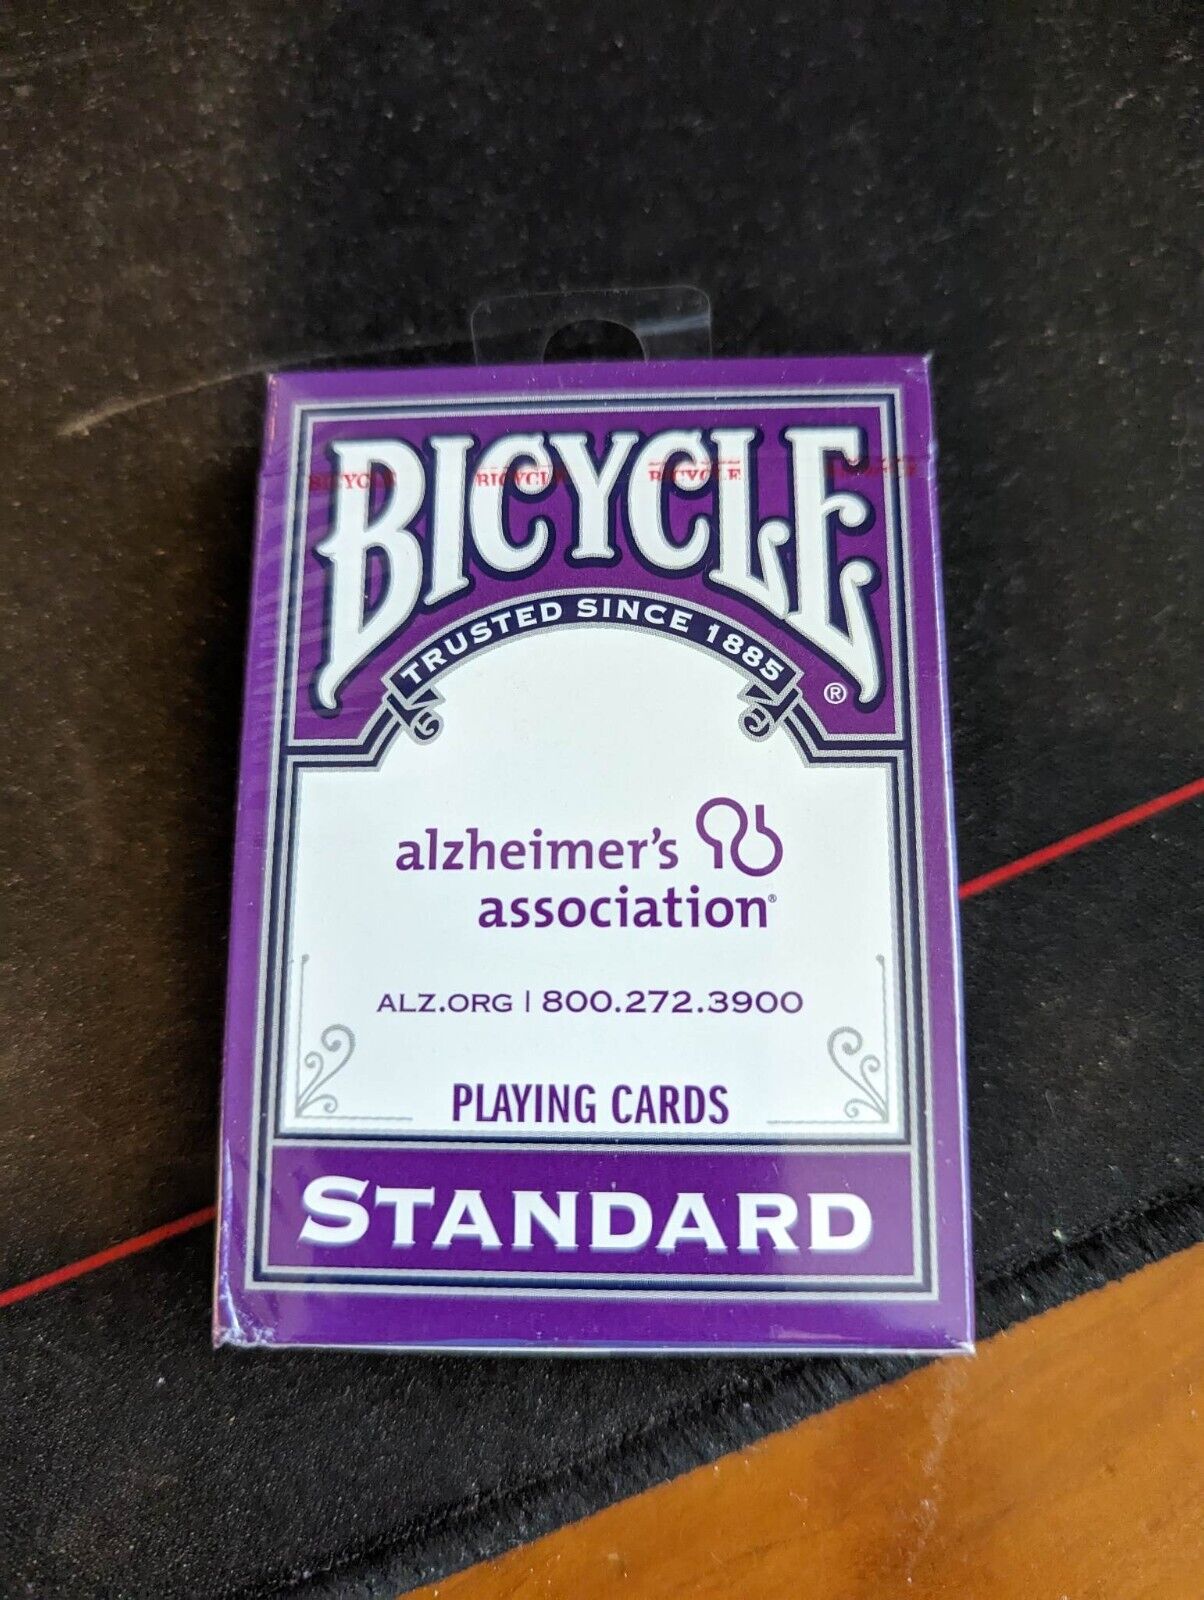 2012 Bicycle Alzheimer\'s Association Playing Cards Deck USPCC Sealed